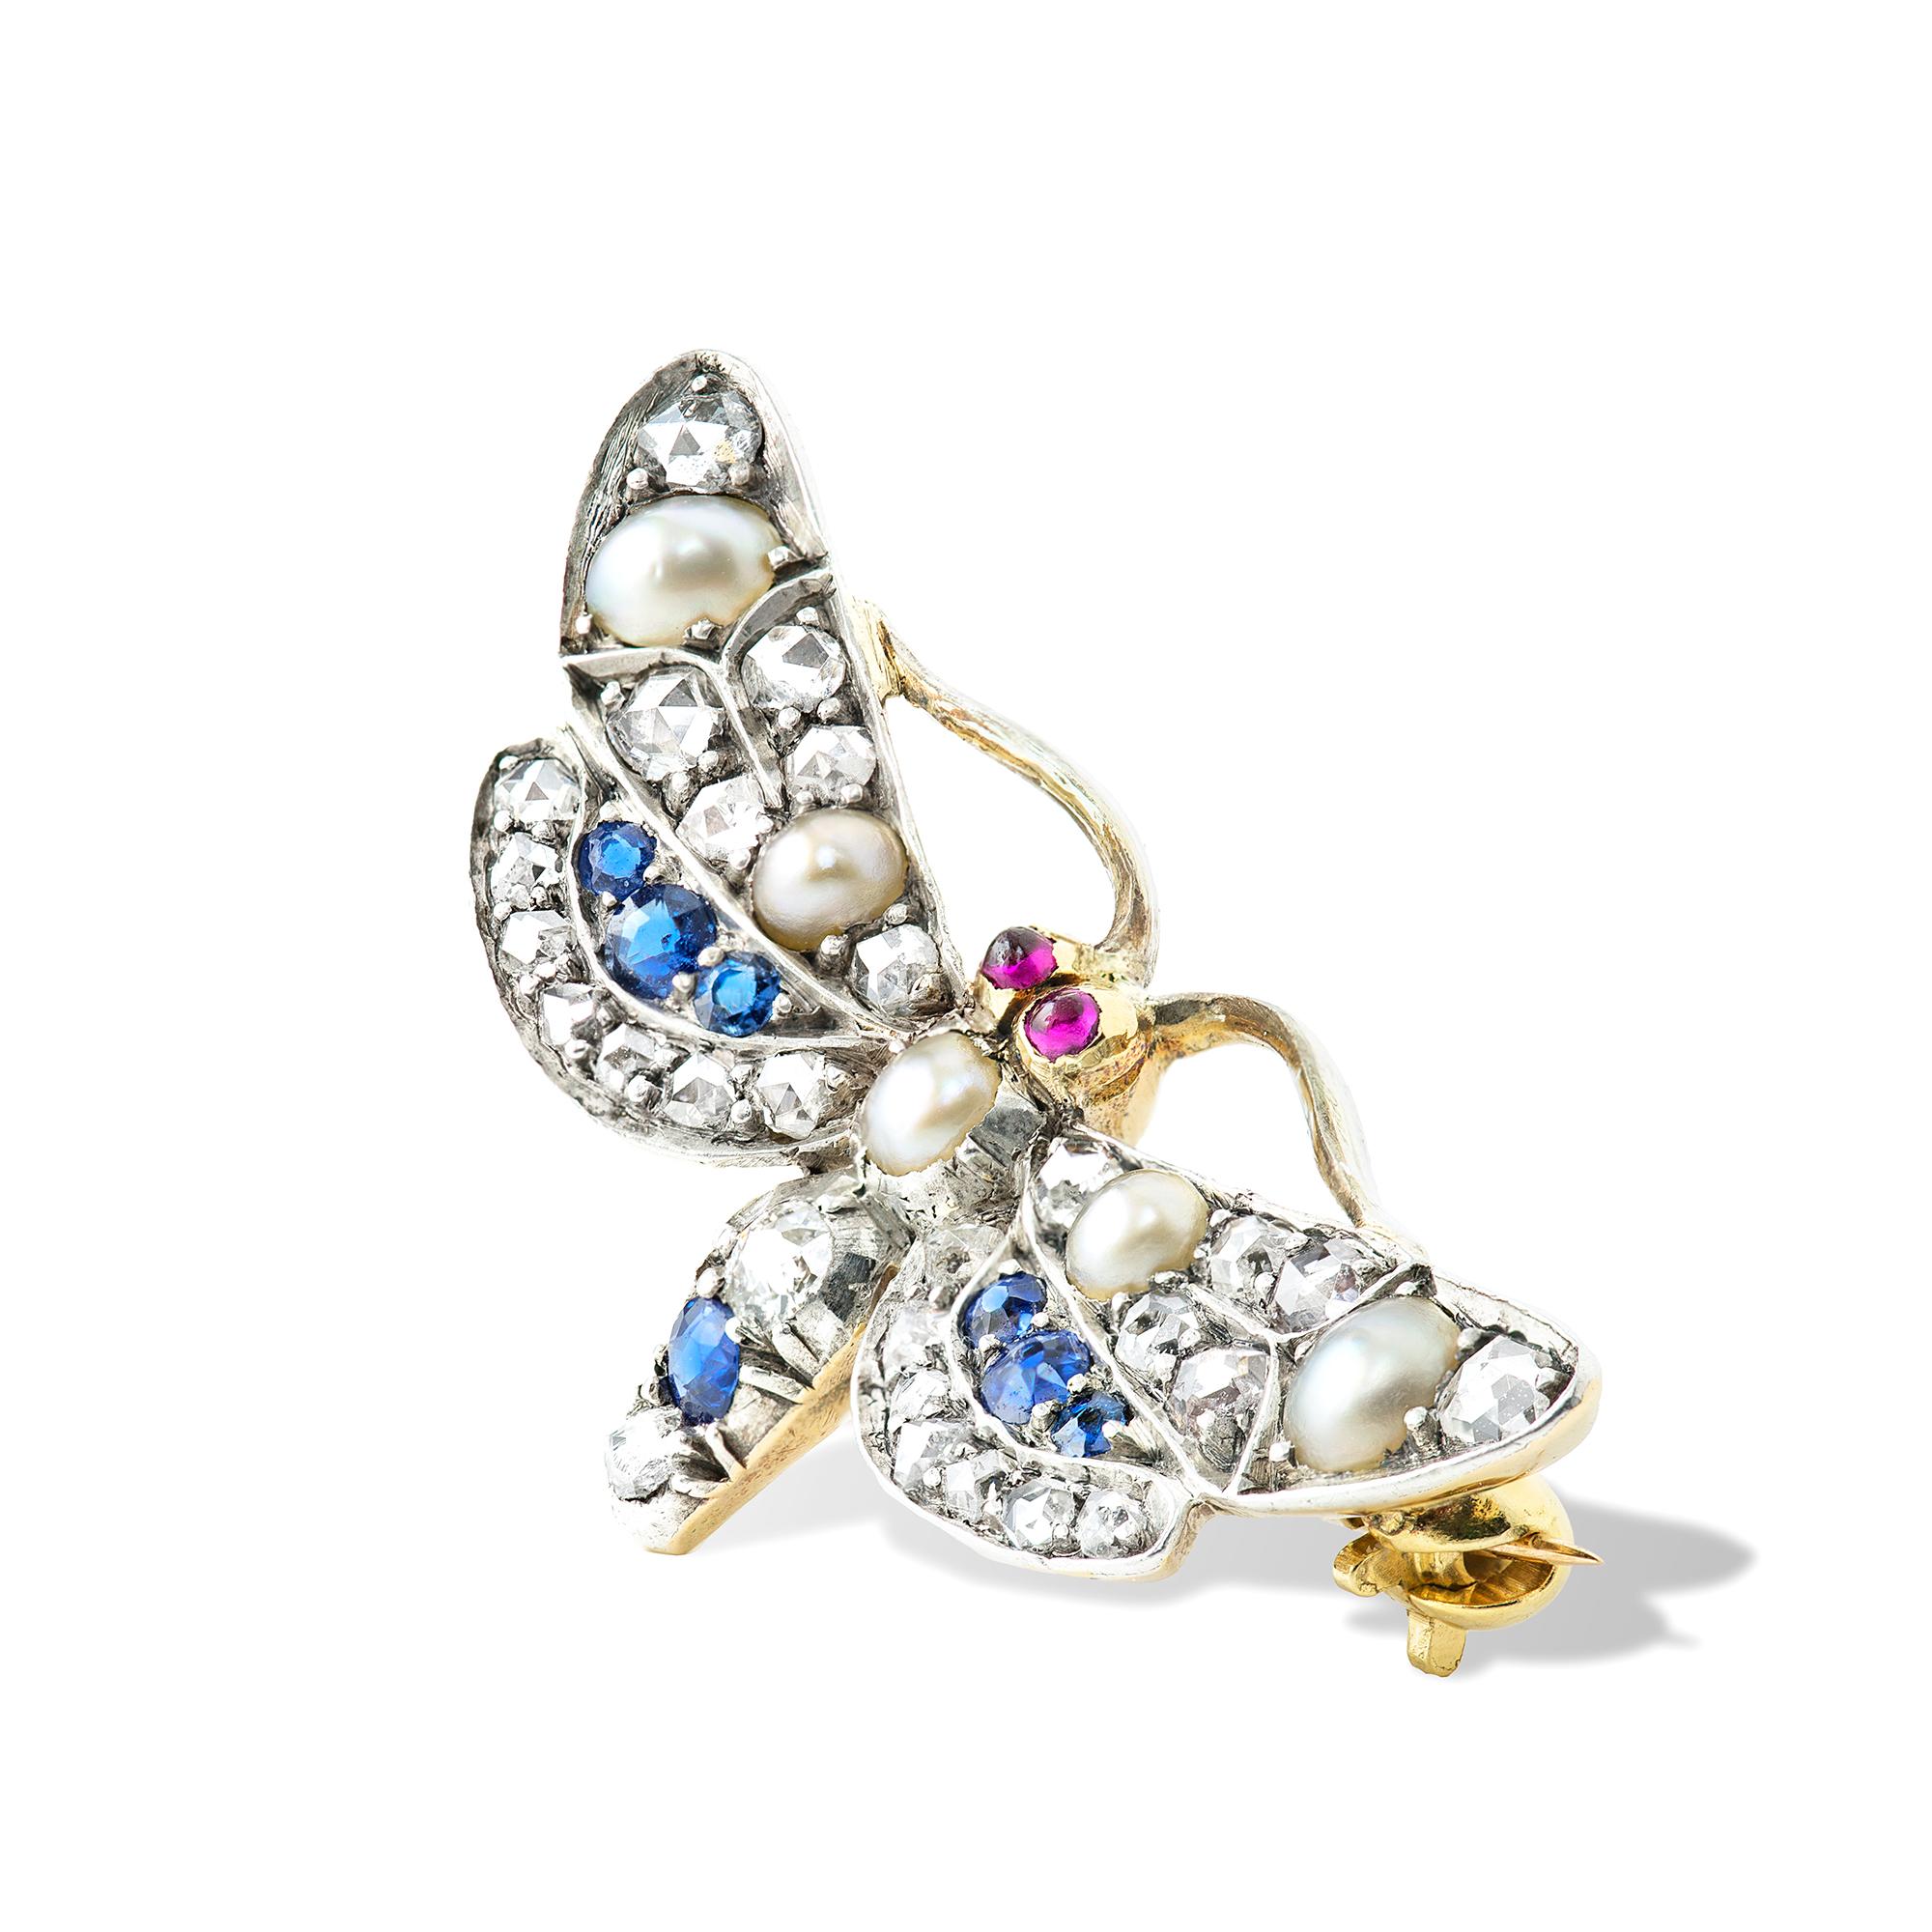 A late Victorian multi-gem butterfly brooch, set with half pearls, diamonds and sapphires with ruby-set eyes, set on silver to yellow gold back, circa 1900, measuring approximately 2.7x1.3cm, gross weight 3.3 grams.

This antique brooch is in good